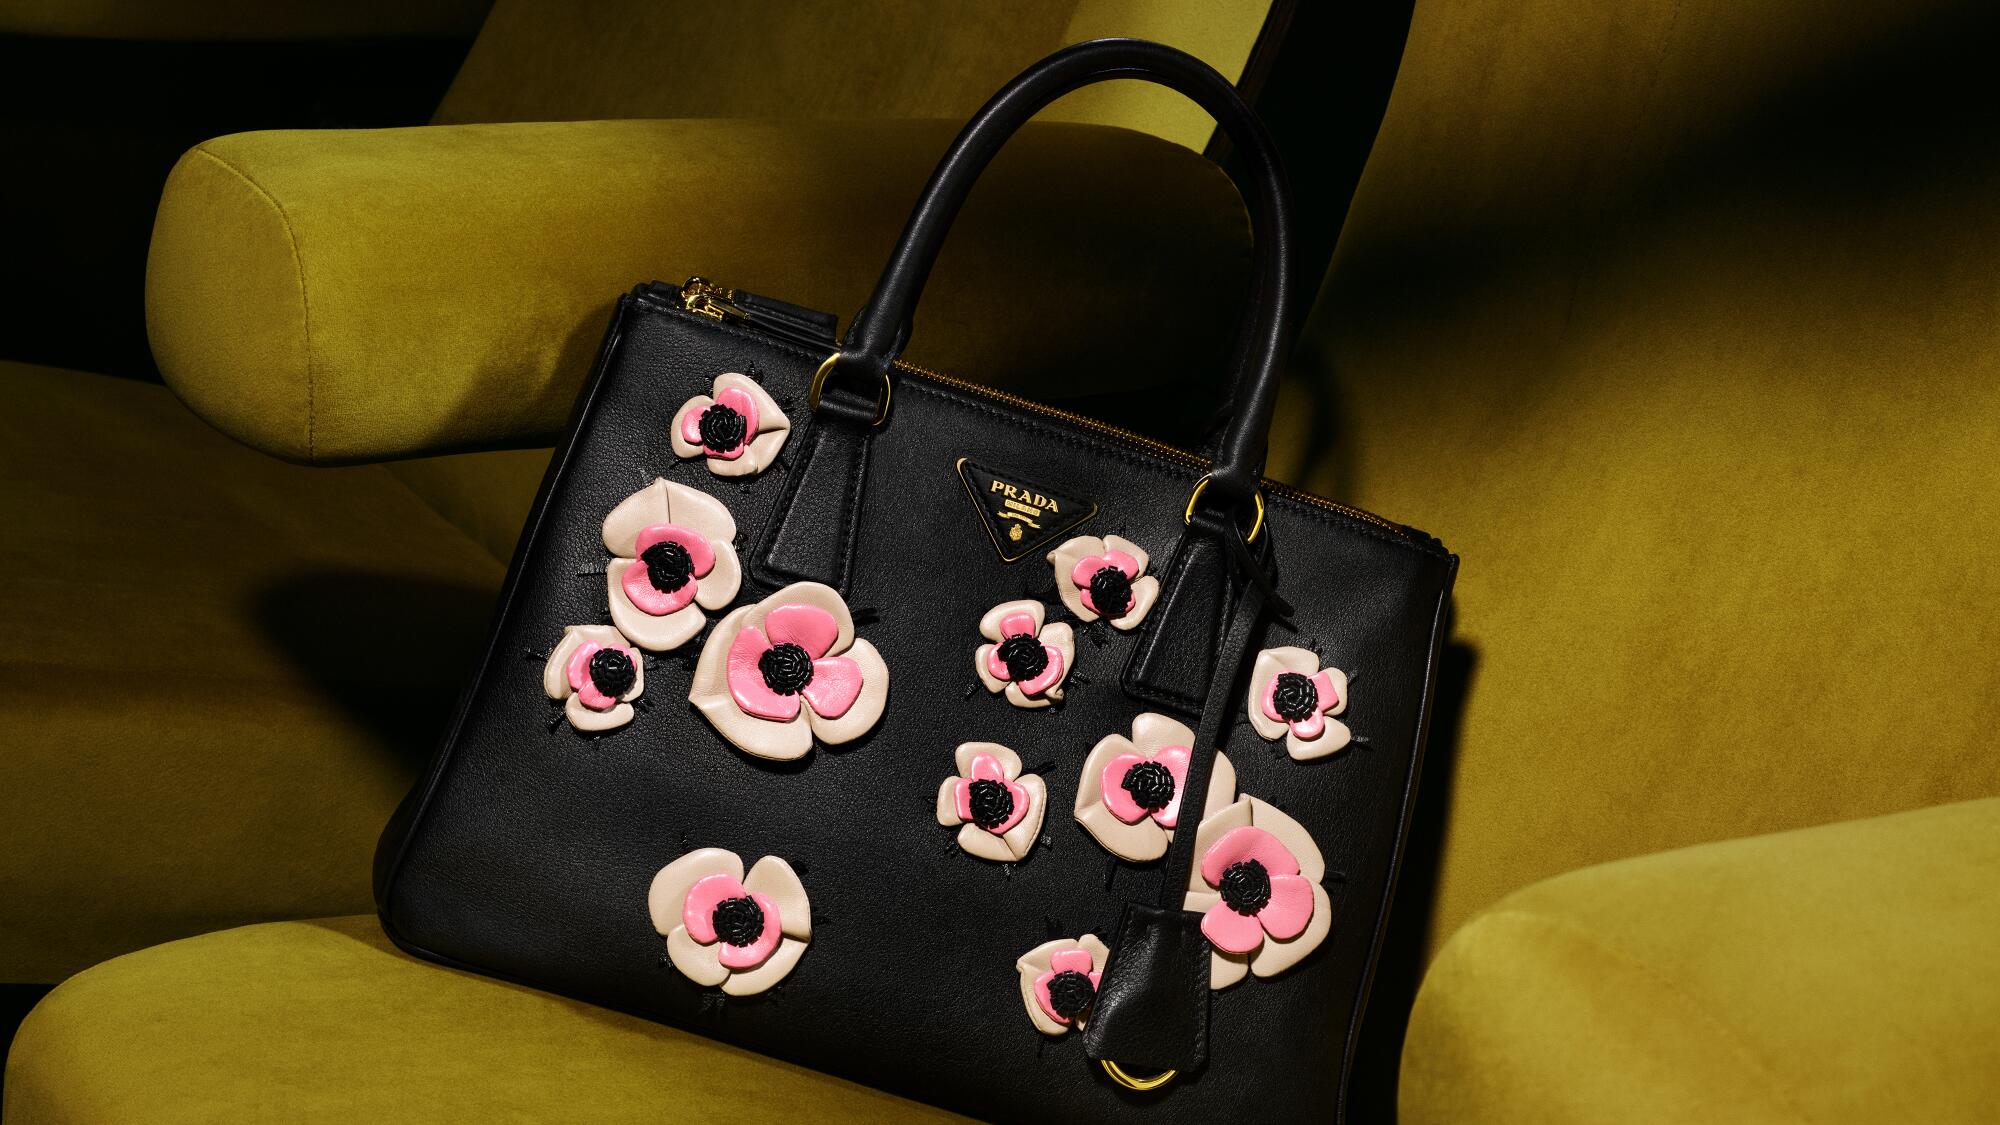 A black purse with pink appliqued flowers sits on a mustard-yellow chair